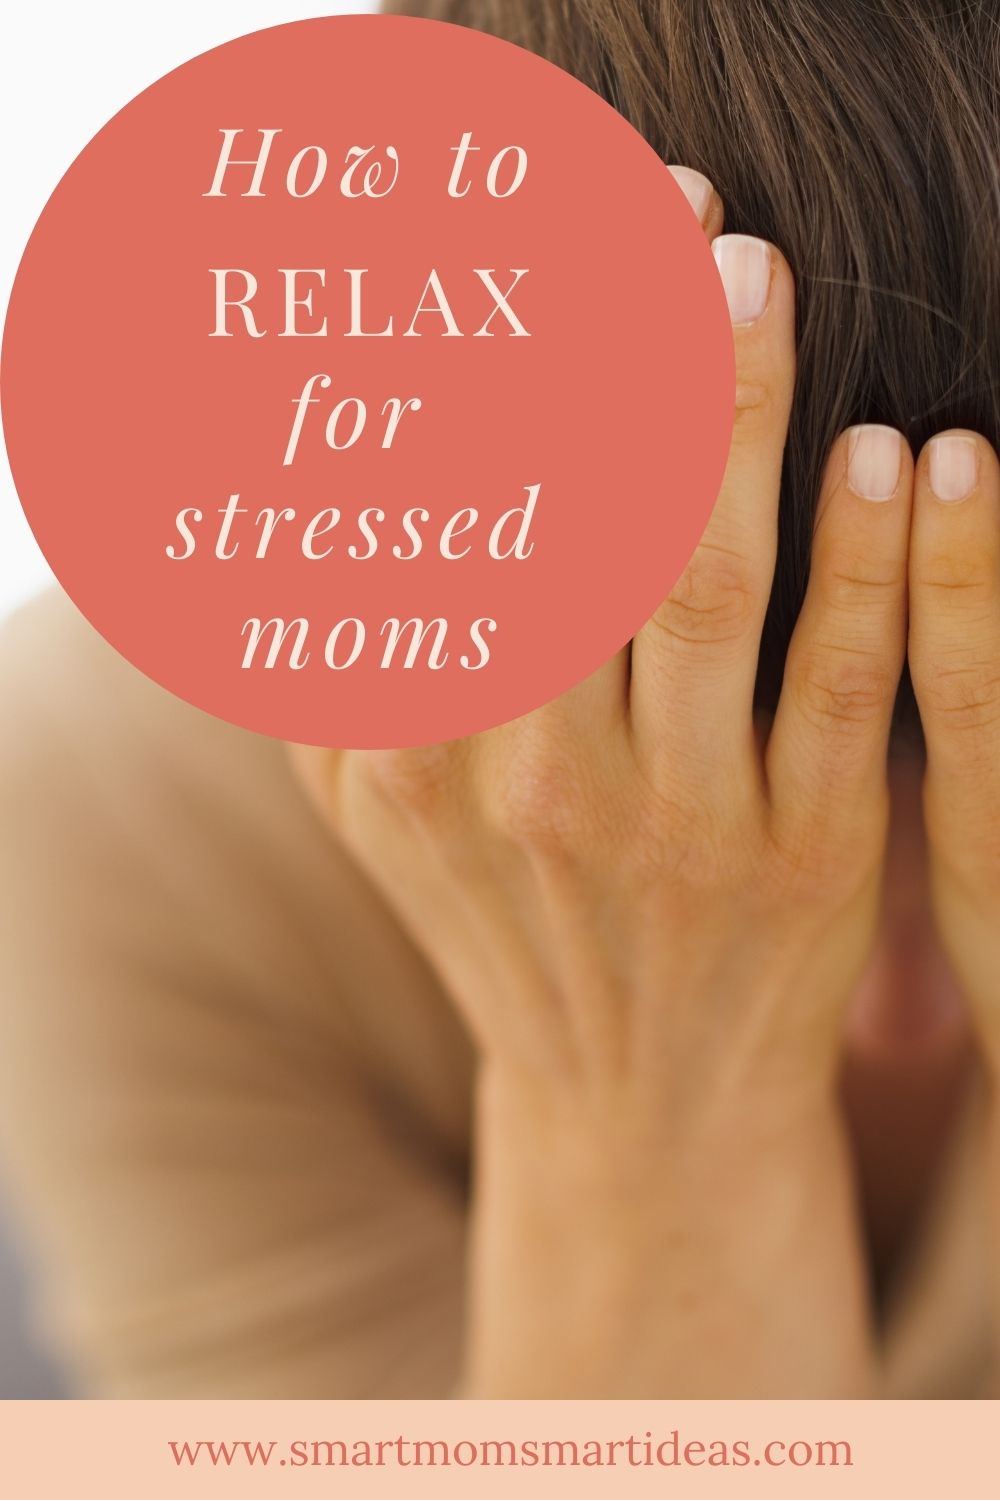 Relaxation ideas for moms